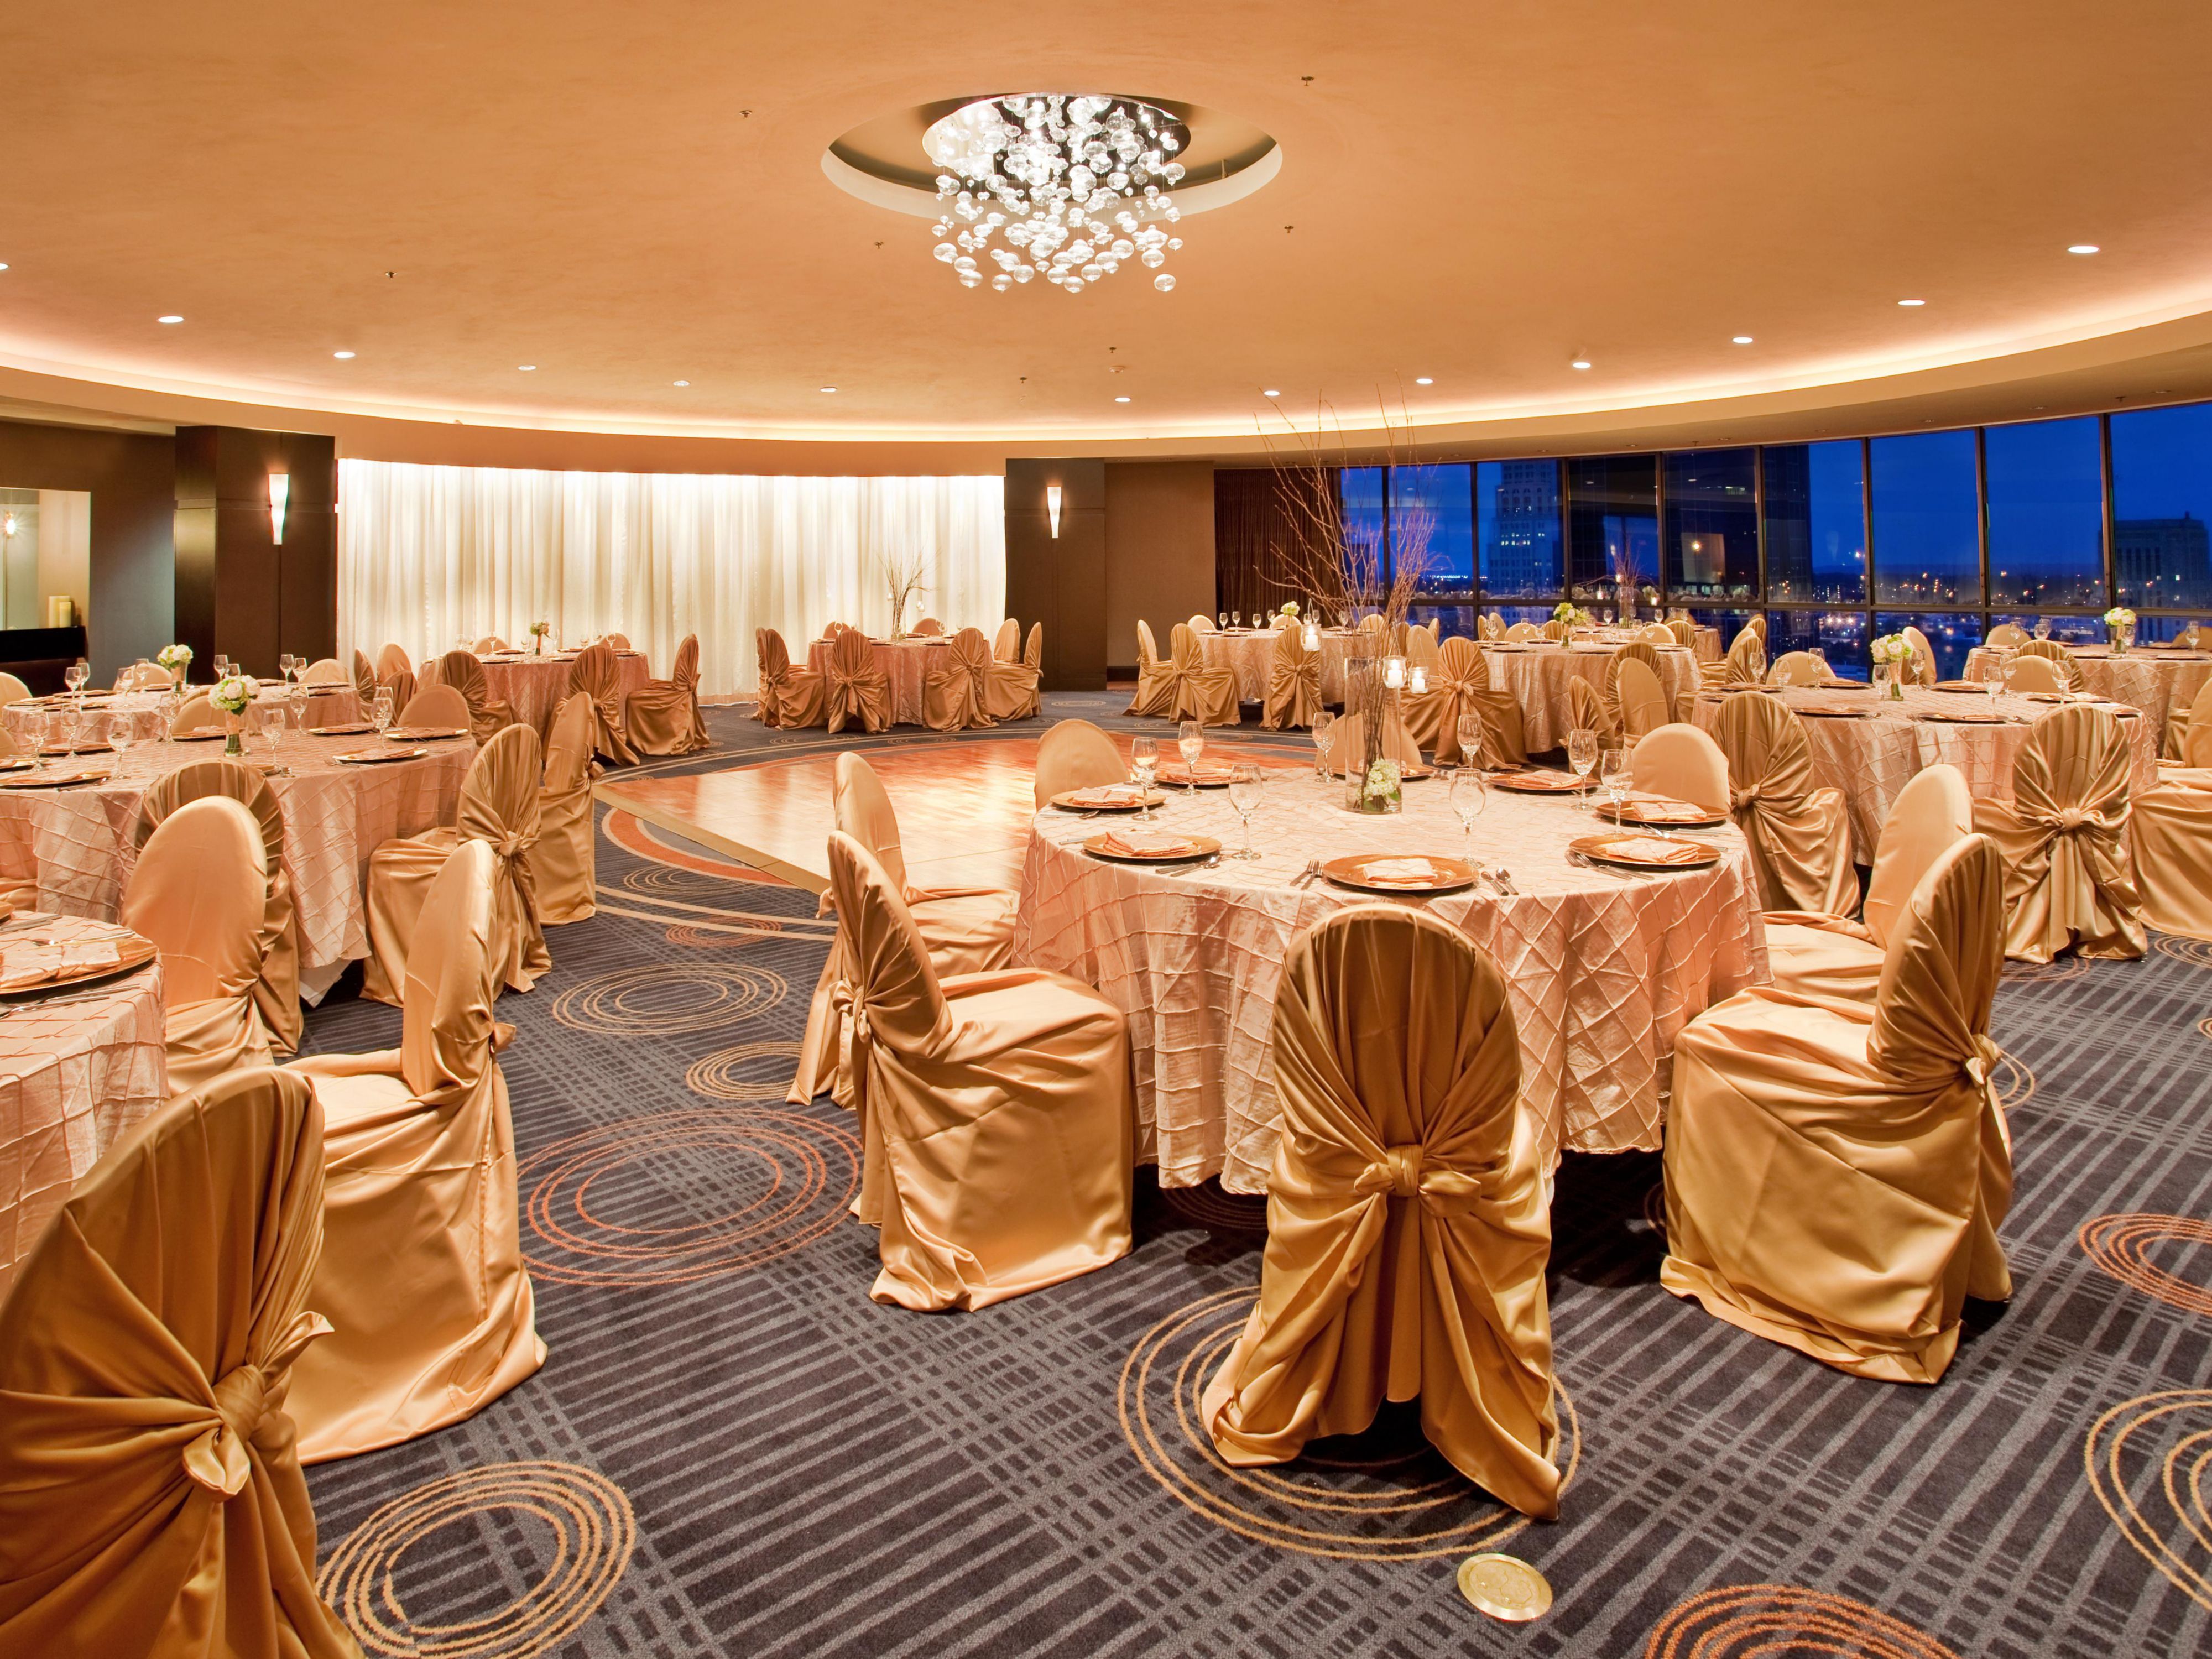 With nearly 15,000 square feet and nine conference rooms, our hotel's flexible meeting space is outfitted with audio-visual technology to ensure successful events. Plus, our stunning Starlight Ballroom features breathtaking views of downtown Kansas City. Our hotel's Meetings Director will help you plan the perfect event.
